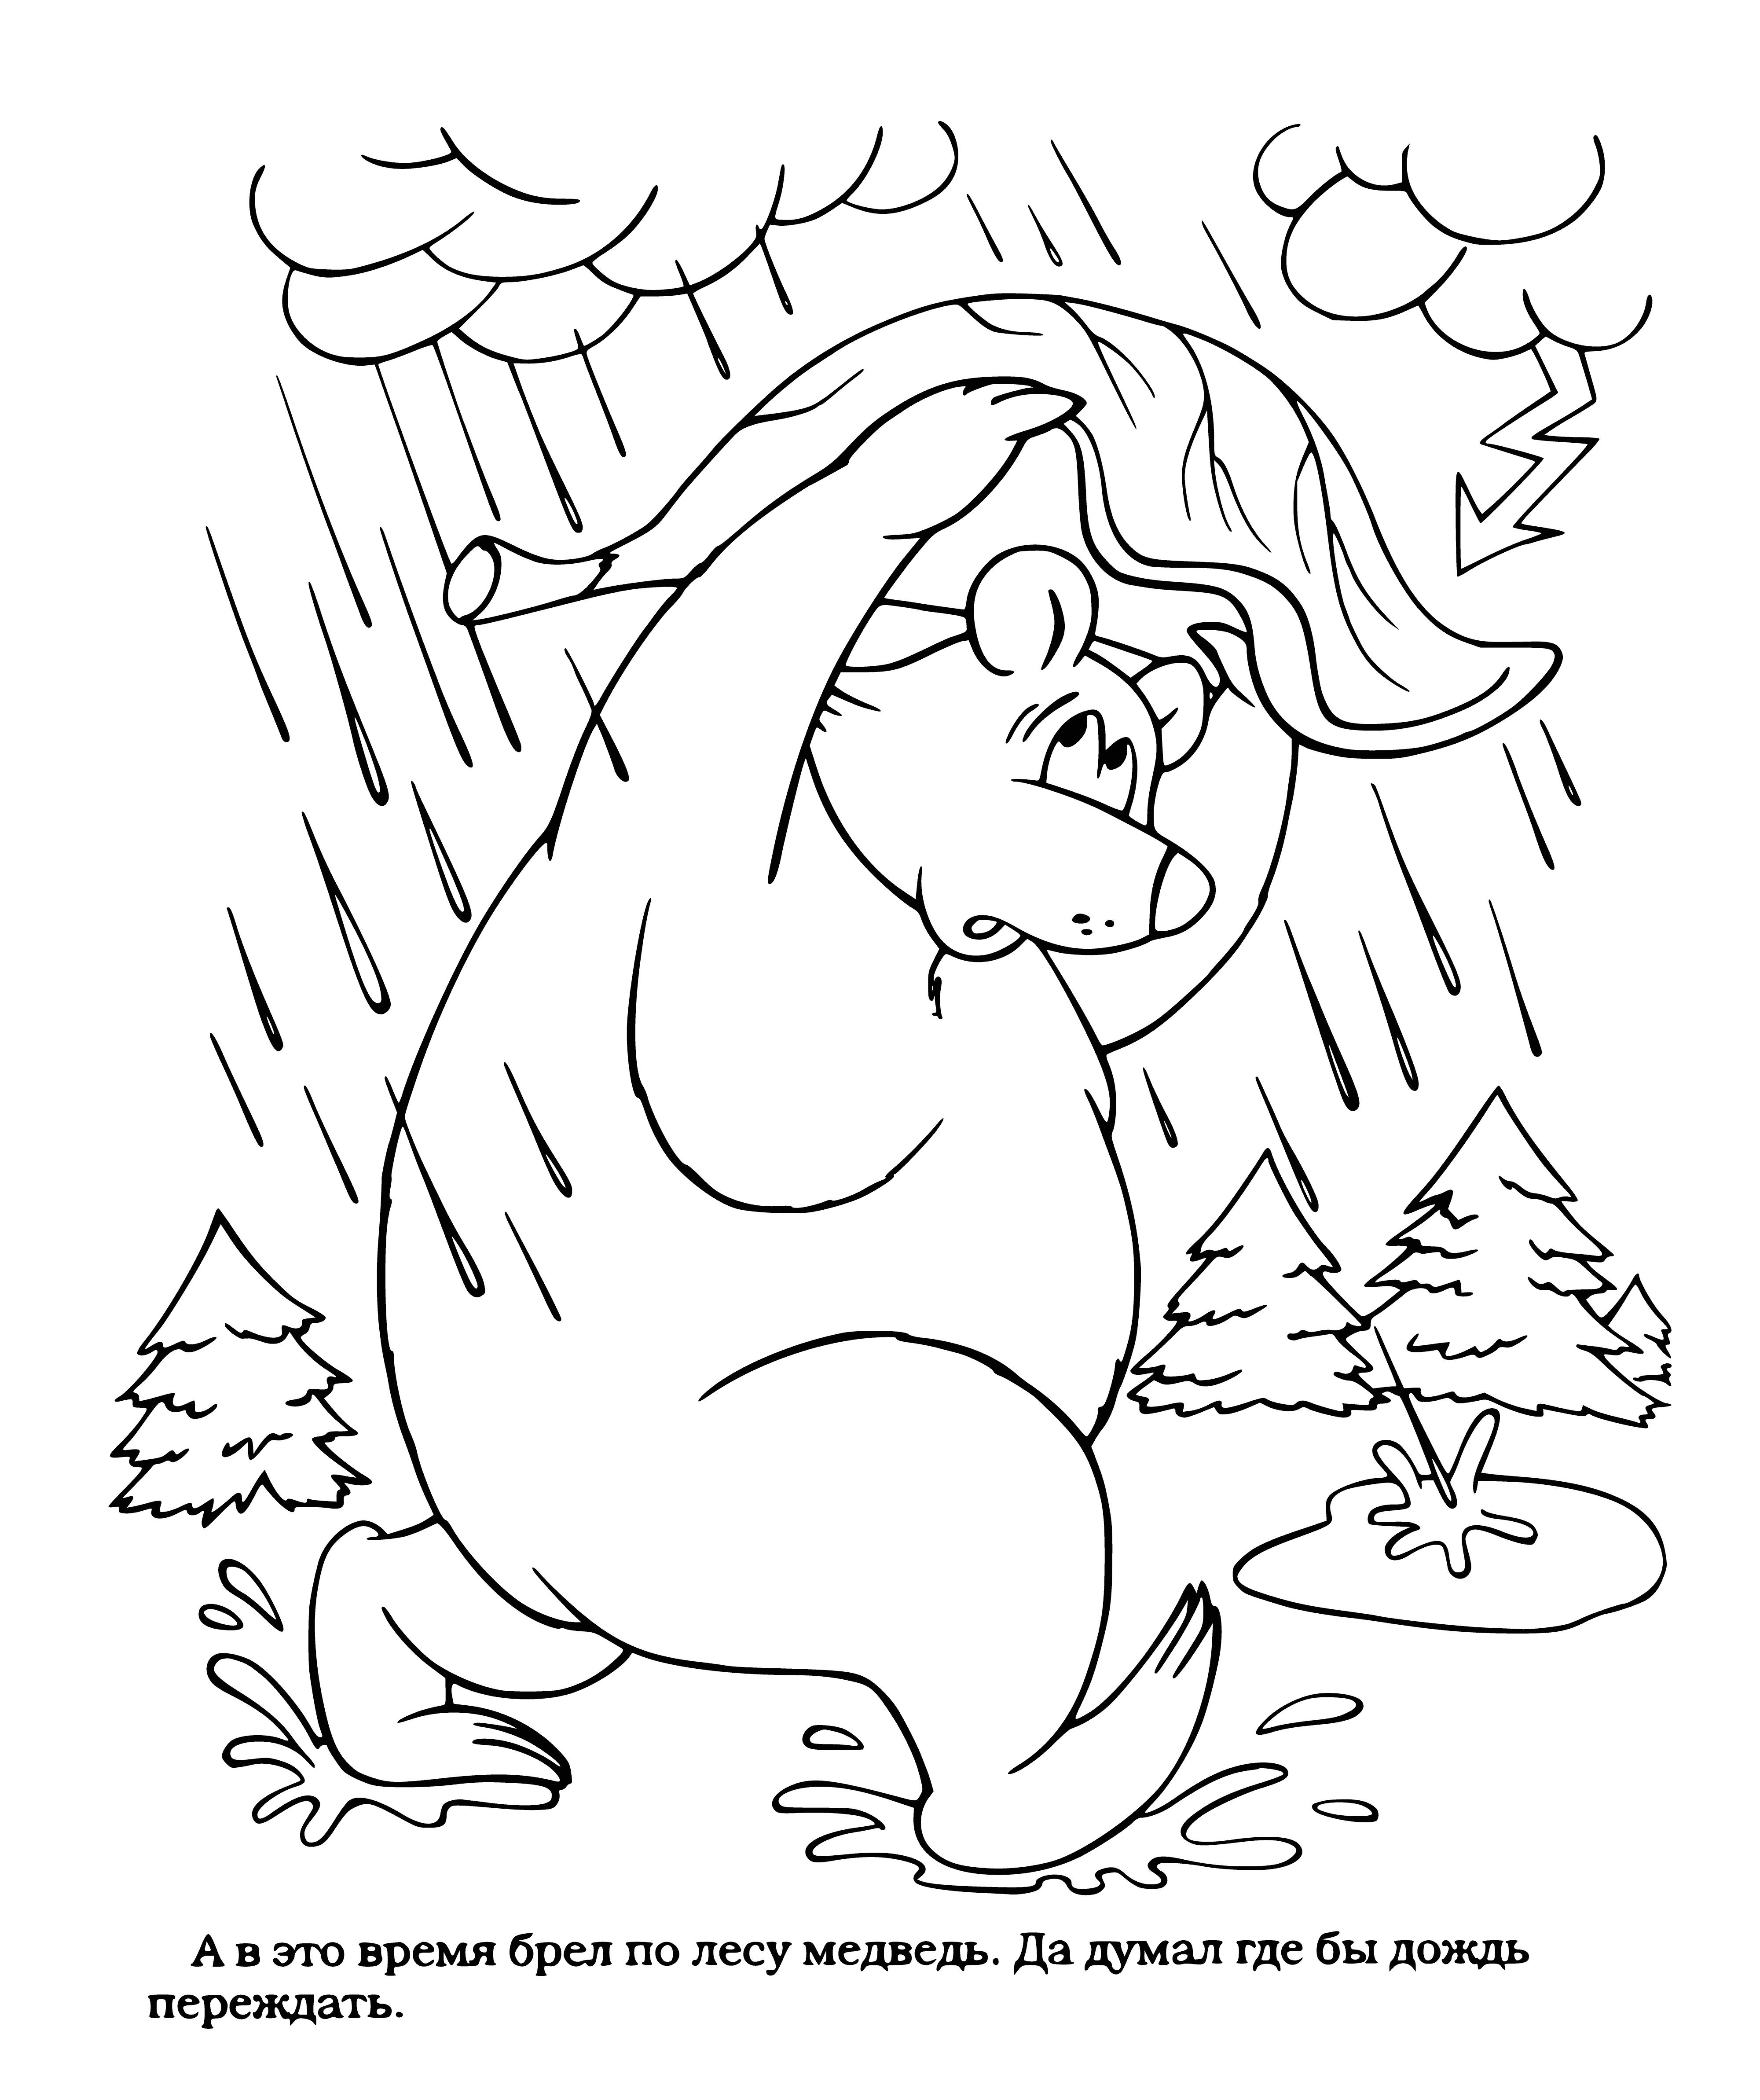 coloring page: Teddy bear bravely braves the rain & is rewarded for his bravery when the family living in a house with a light on give him a towel to dry off!